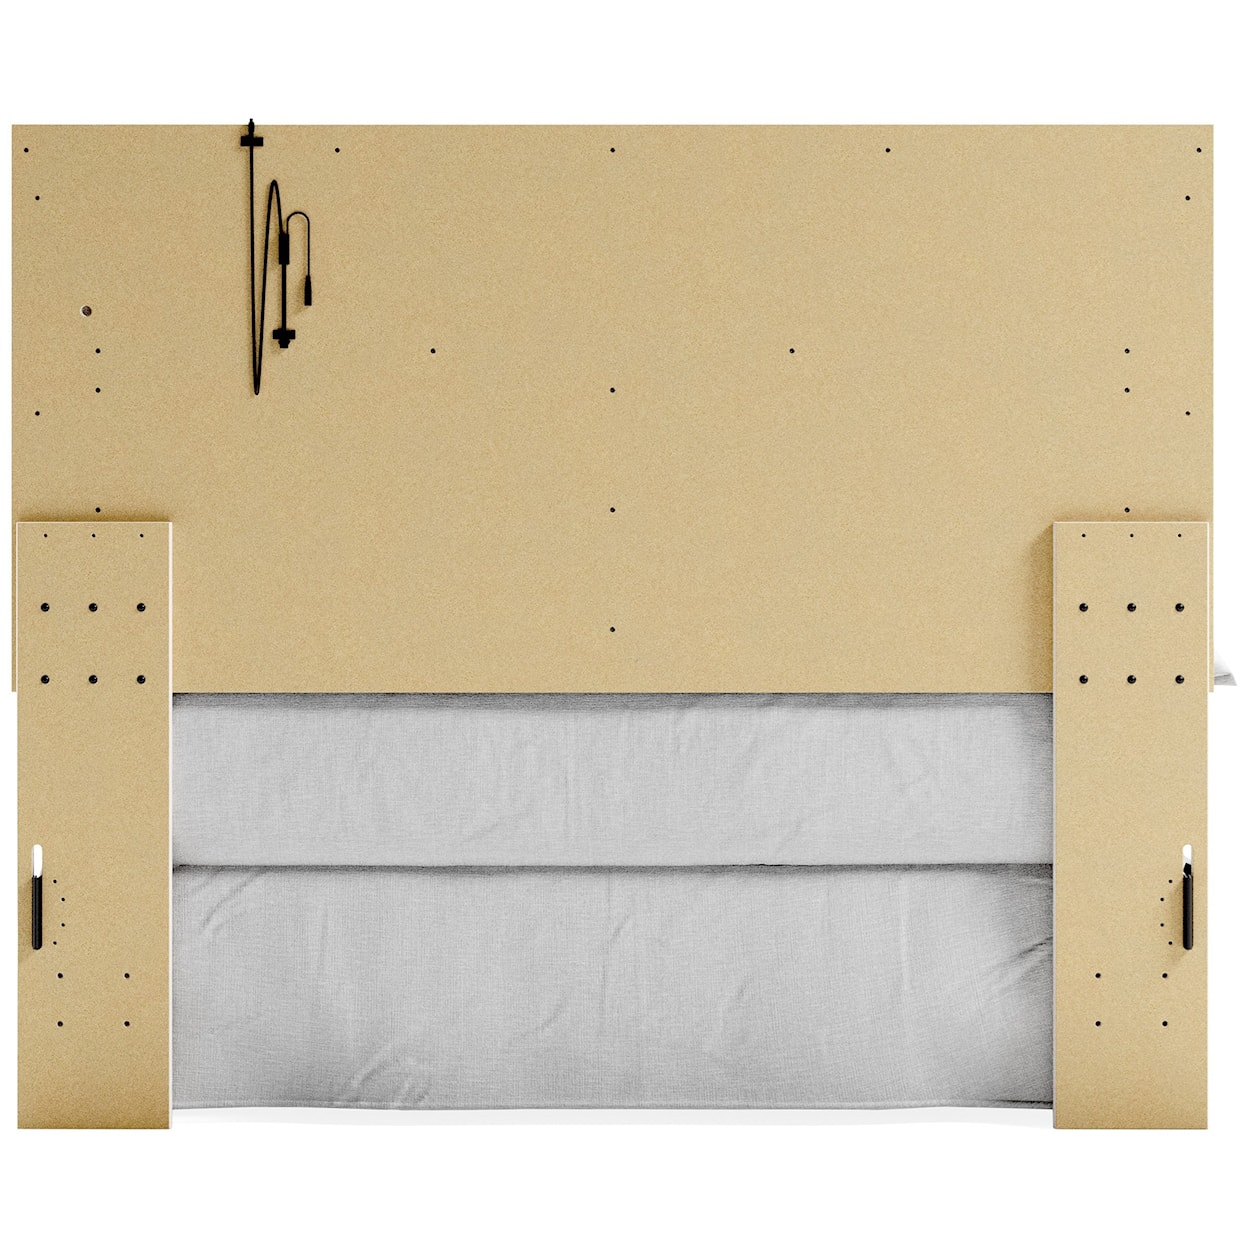 Ashley Signature Design Altyra Queen/Full Upholstered Panel Headboard